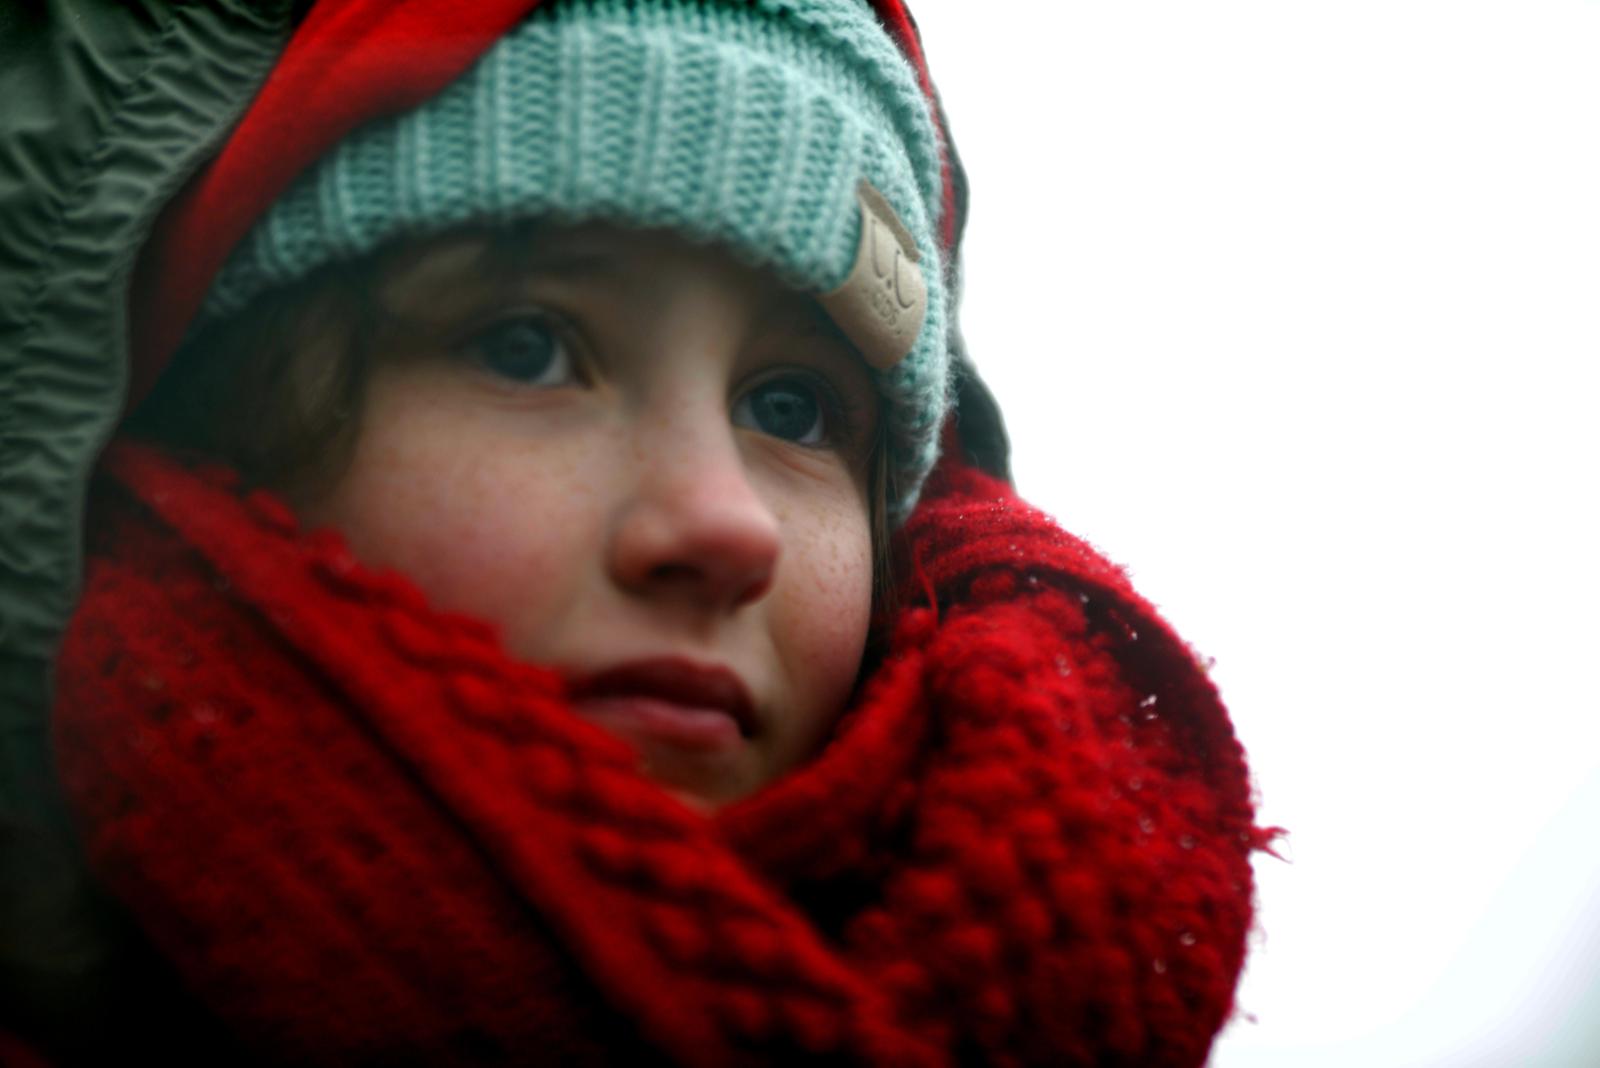 Features - A young girl gazes over a sea of red at an empty street,...